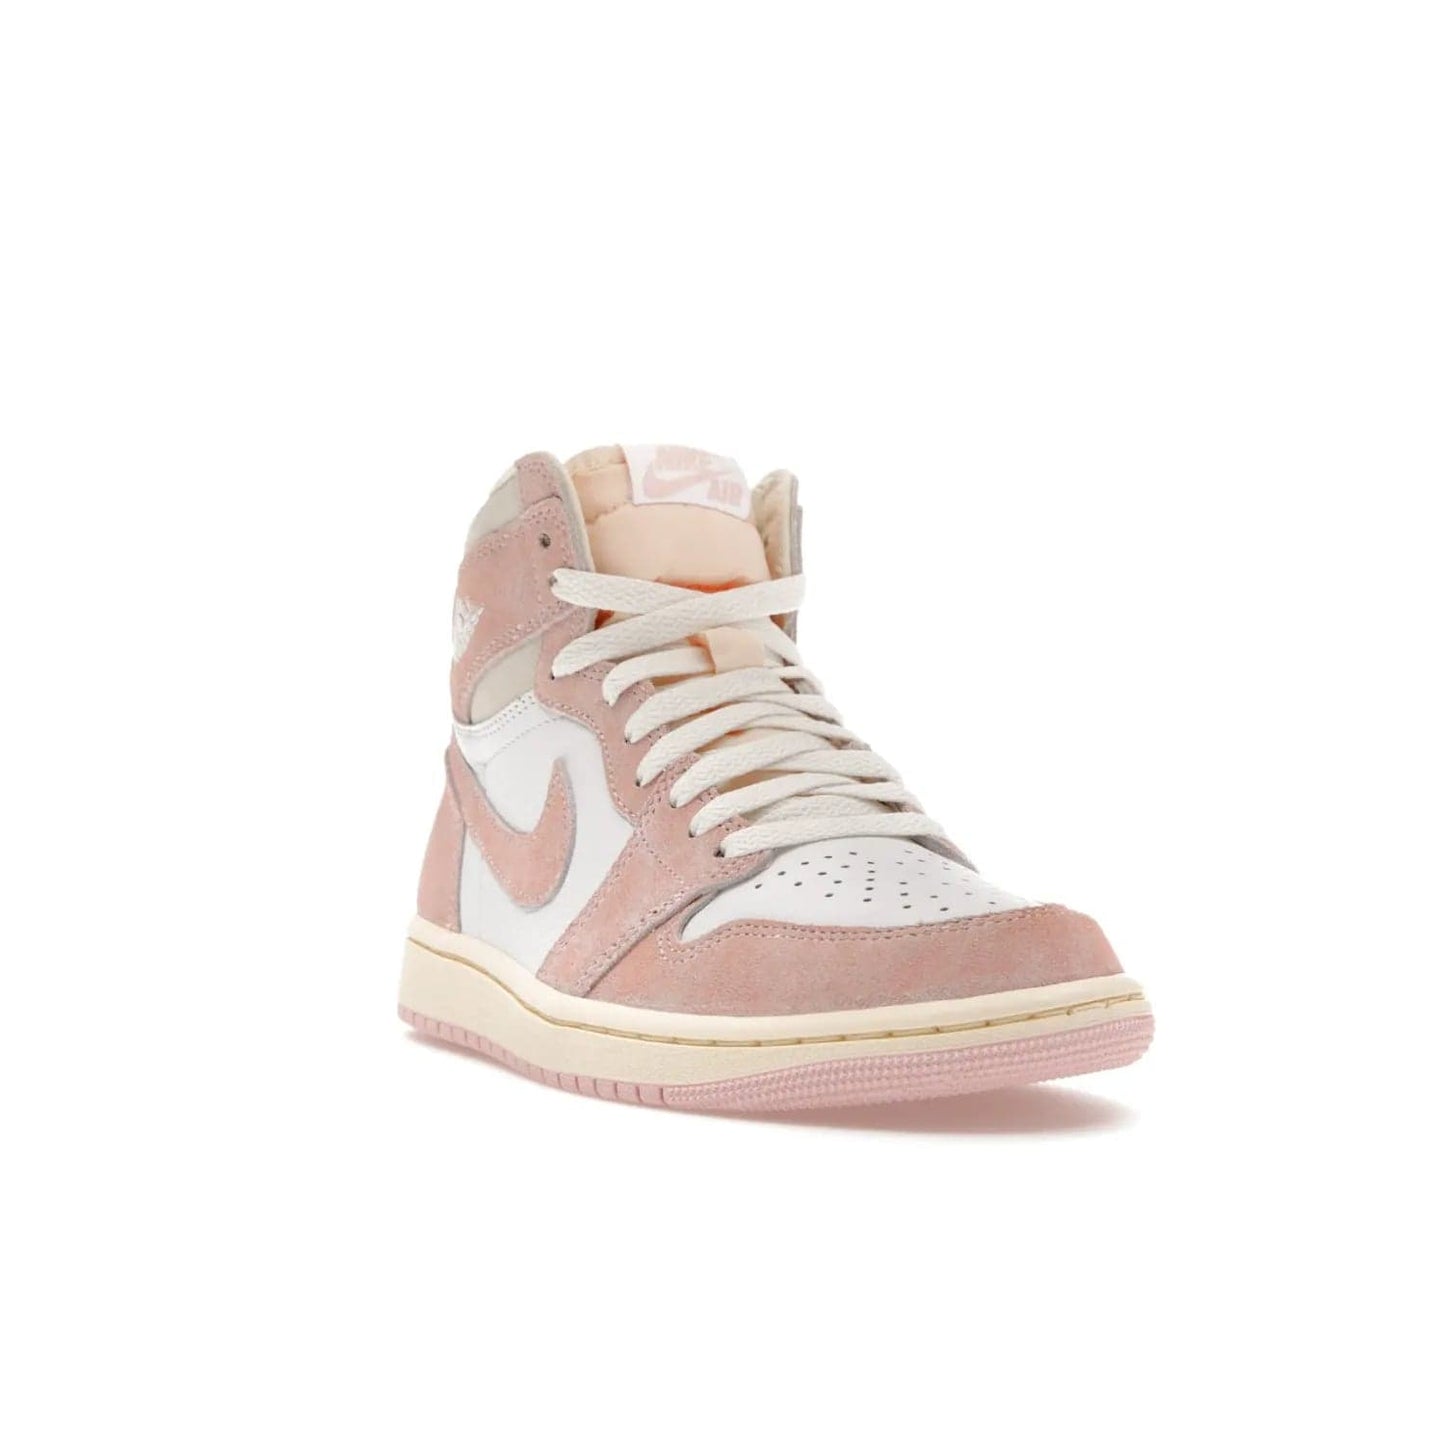 Jordan 1 Retro High OG Washed Pink (Women's) - Image 7 - Only at www.BallersClubKickz.com - Iconic Air Jordan 1 Retro High OG for women with unique pink suede and white leather uppers. Get the timeless look on April 22, 2023.